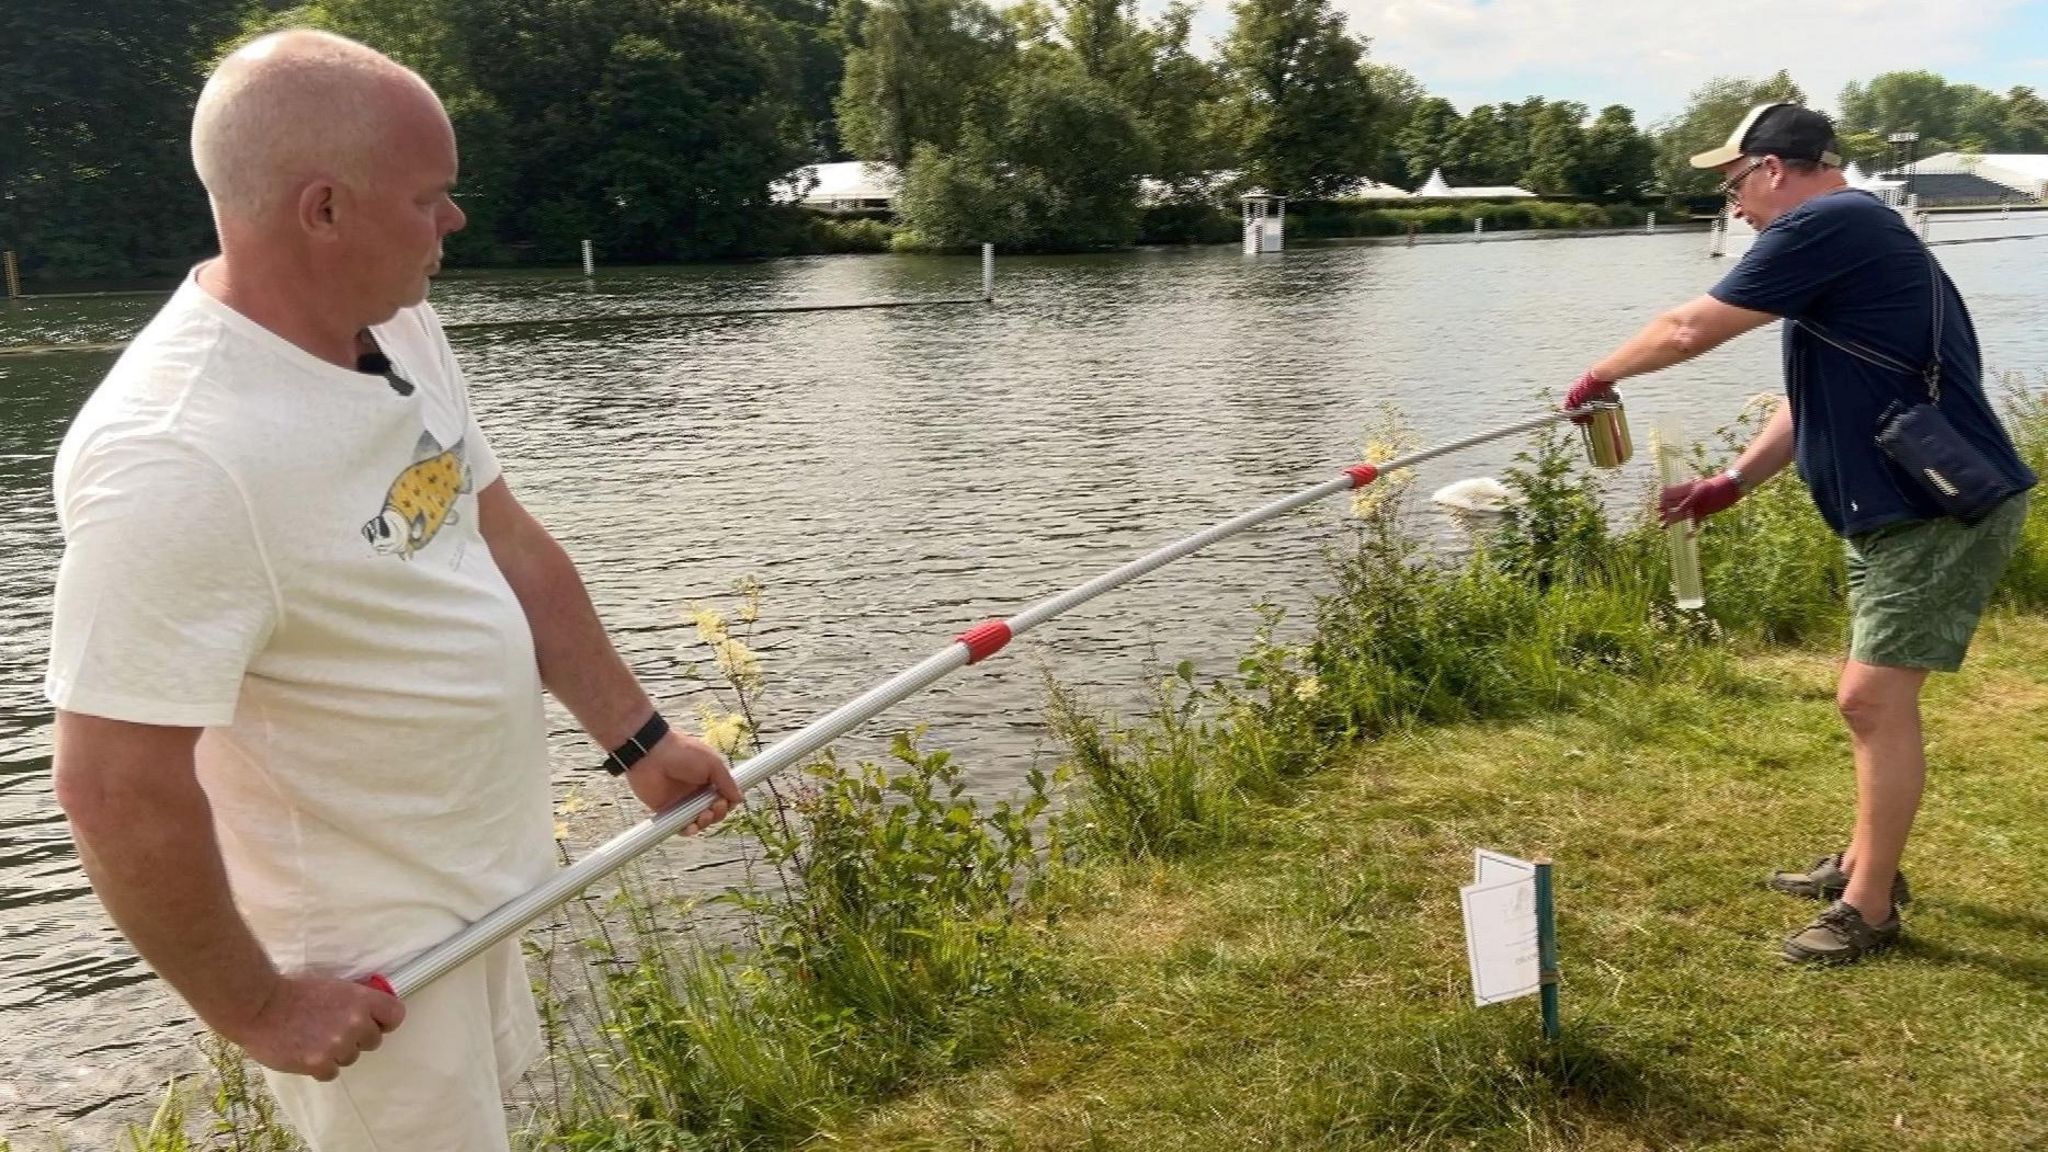 Two River Action members collecting water using a long pole alongside the River Thames 